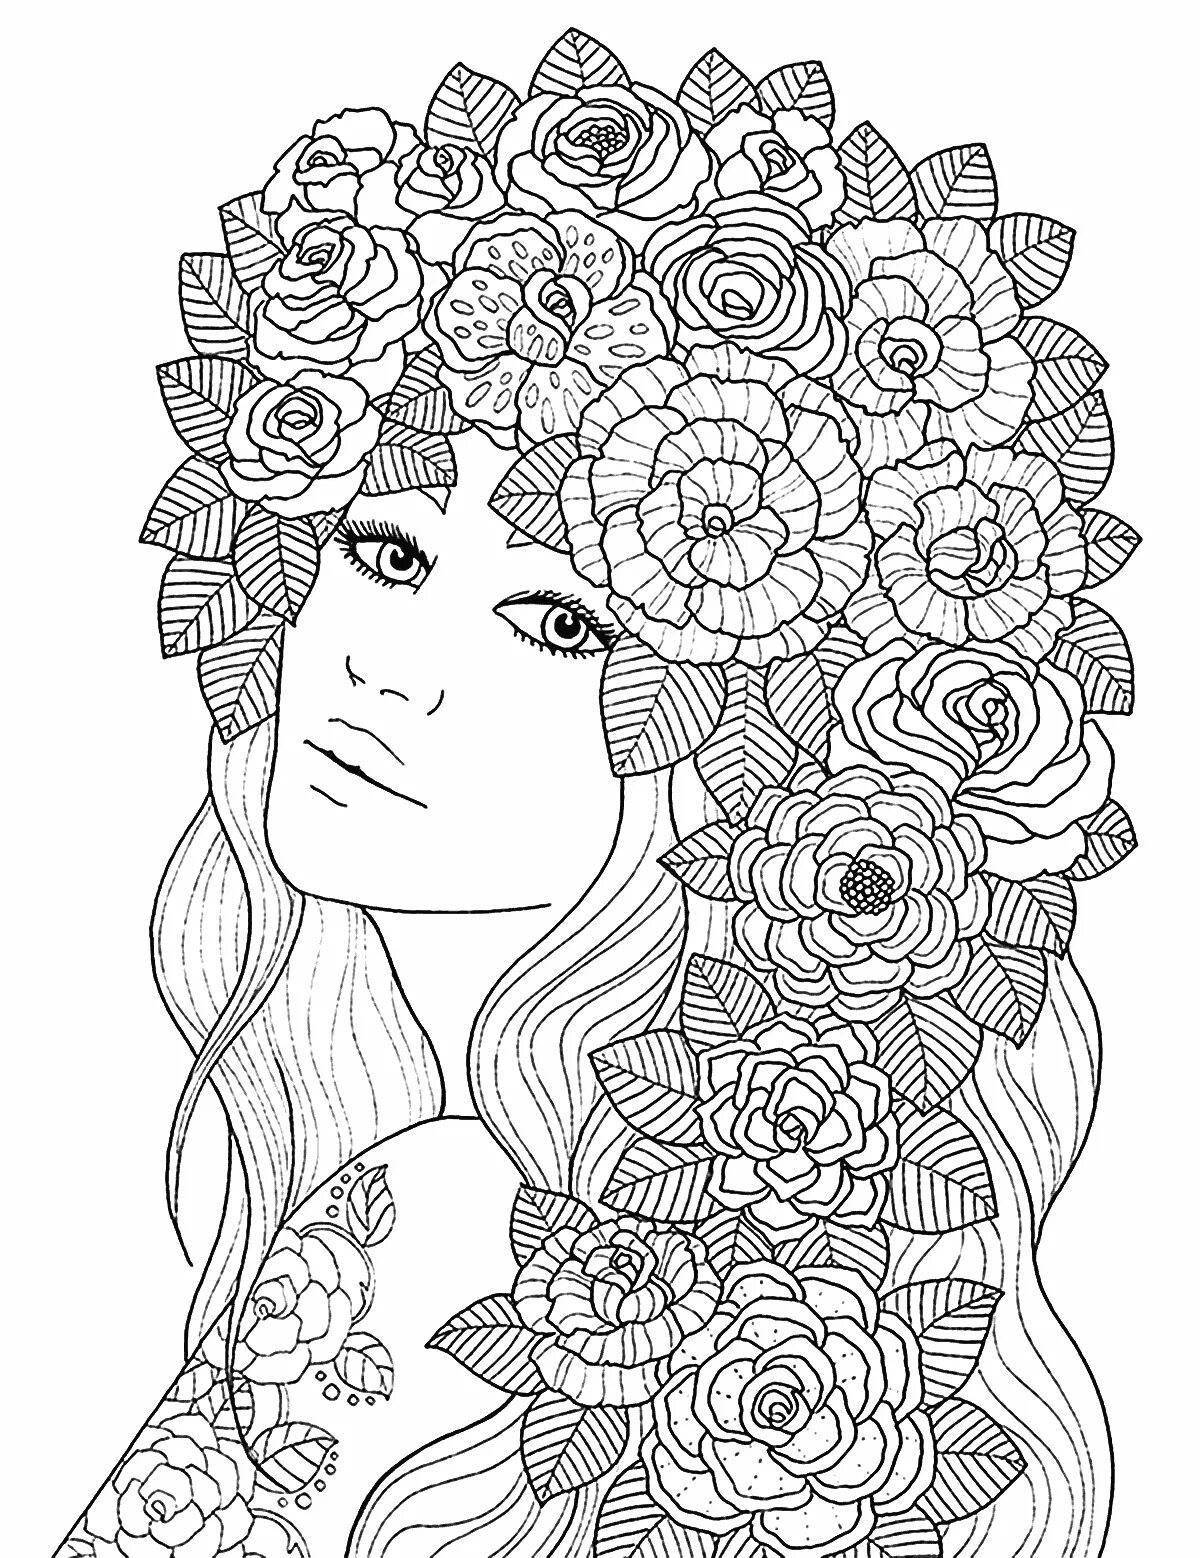 Live anti-stress spring coloring